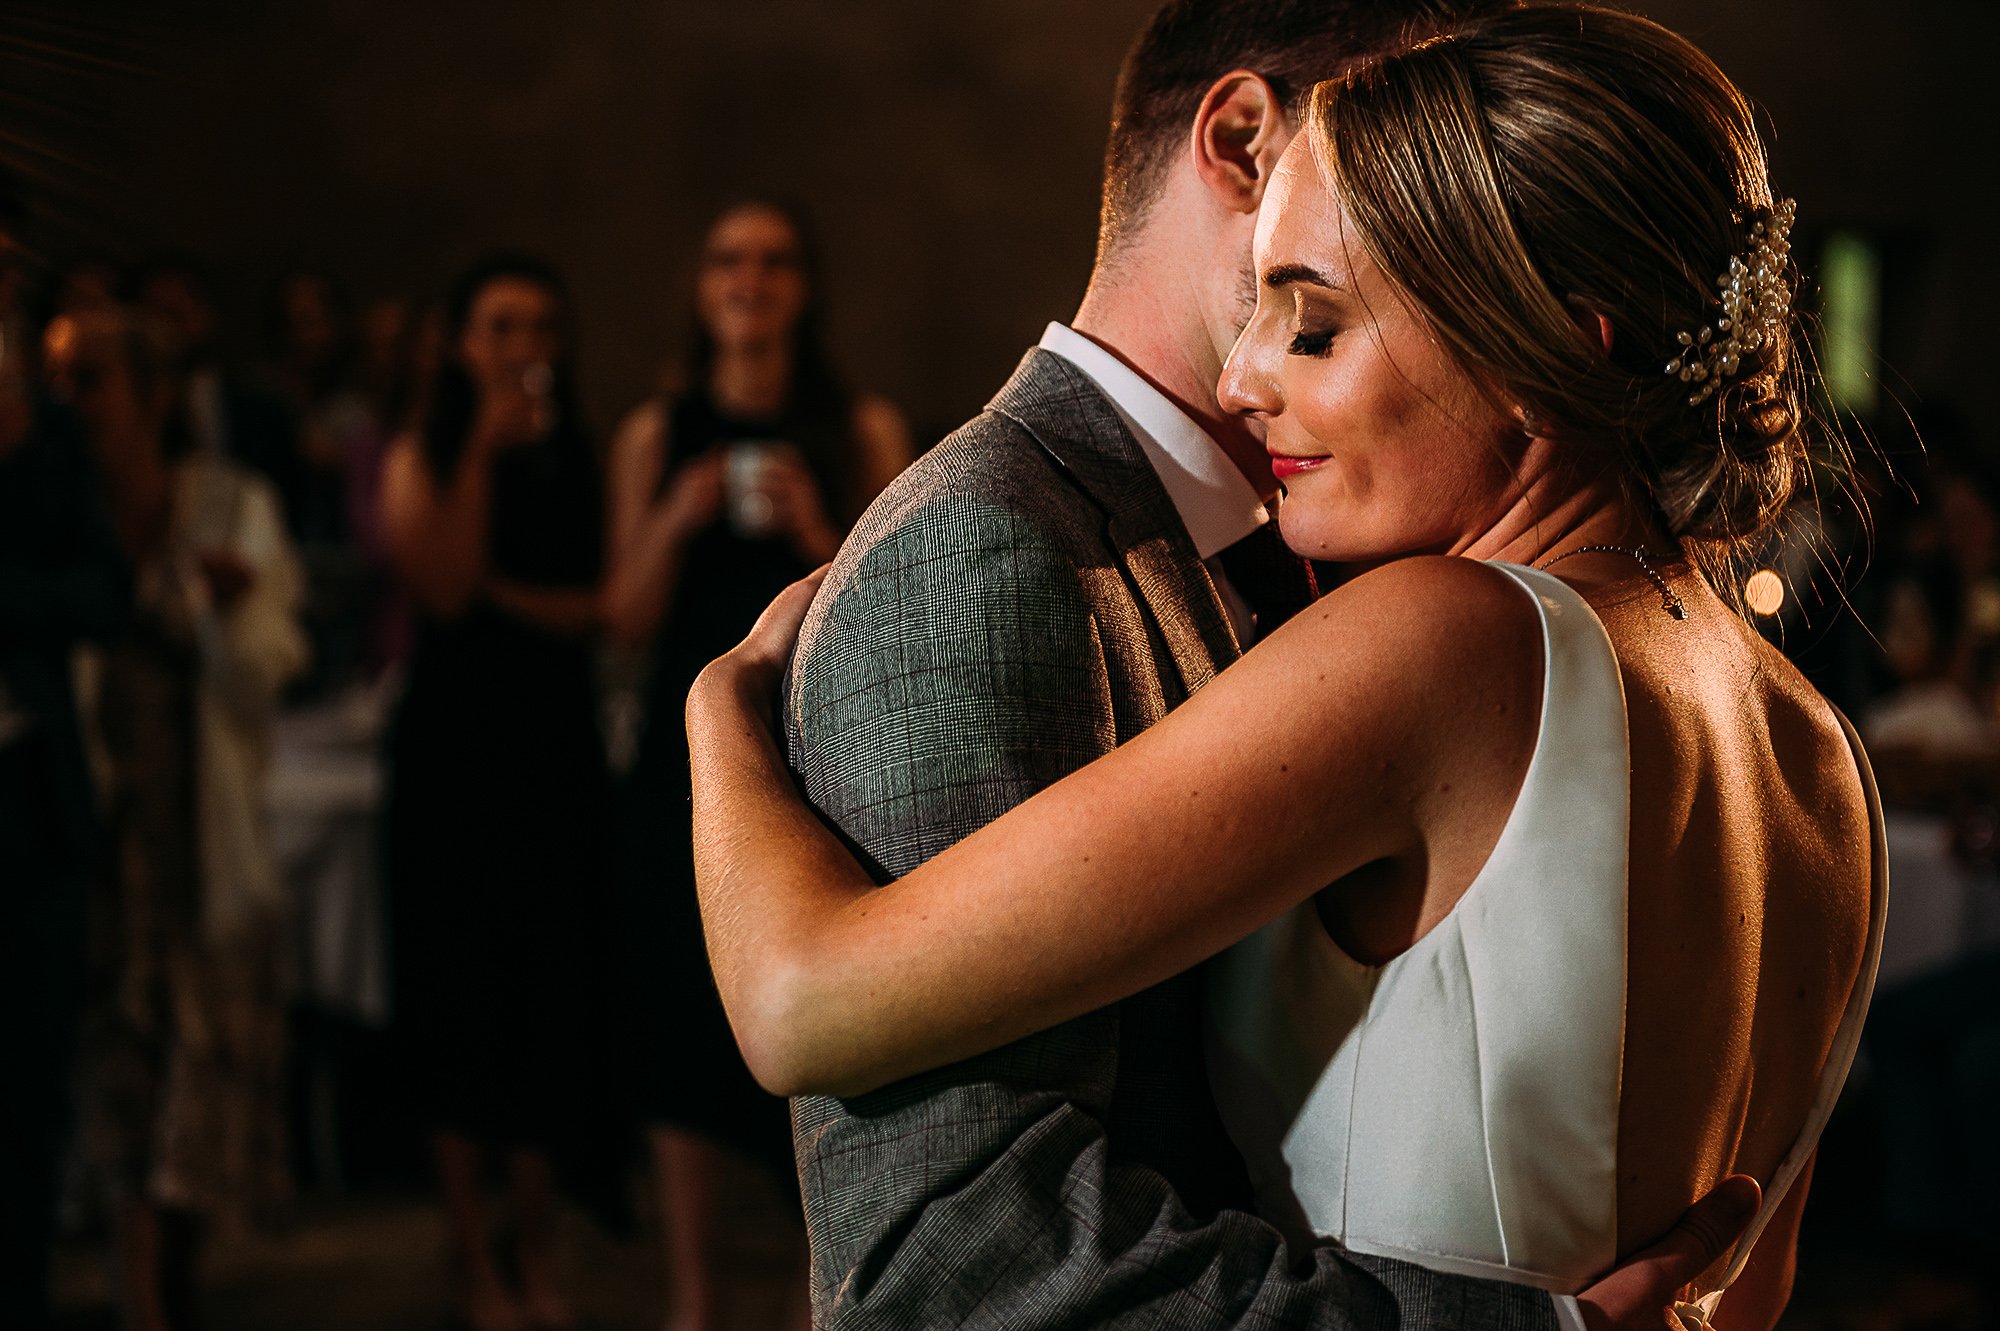  Loving and intimate first dance photo. 